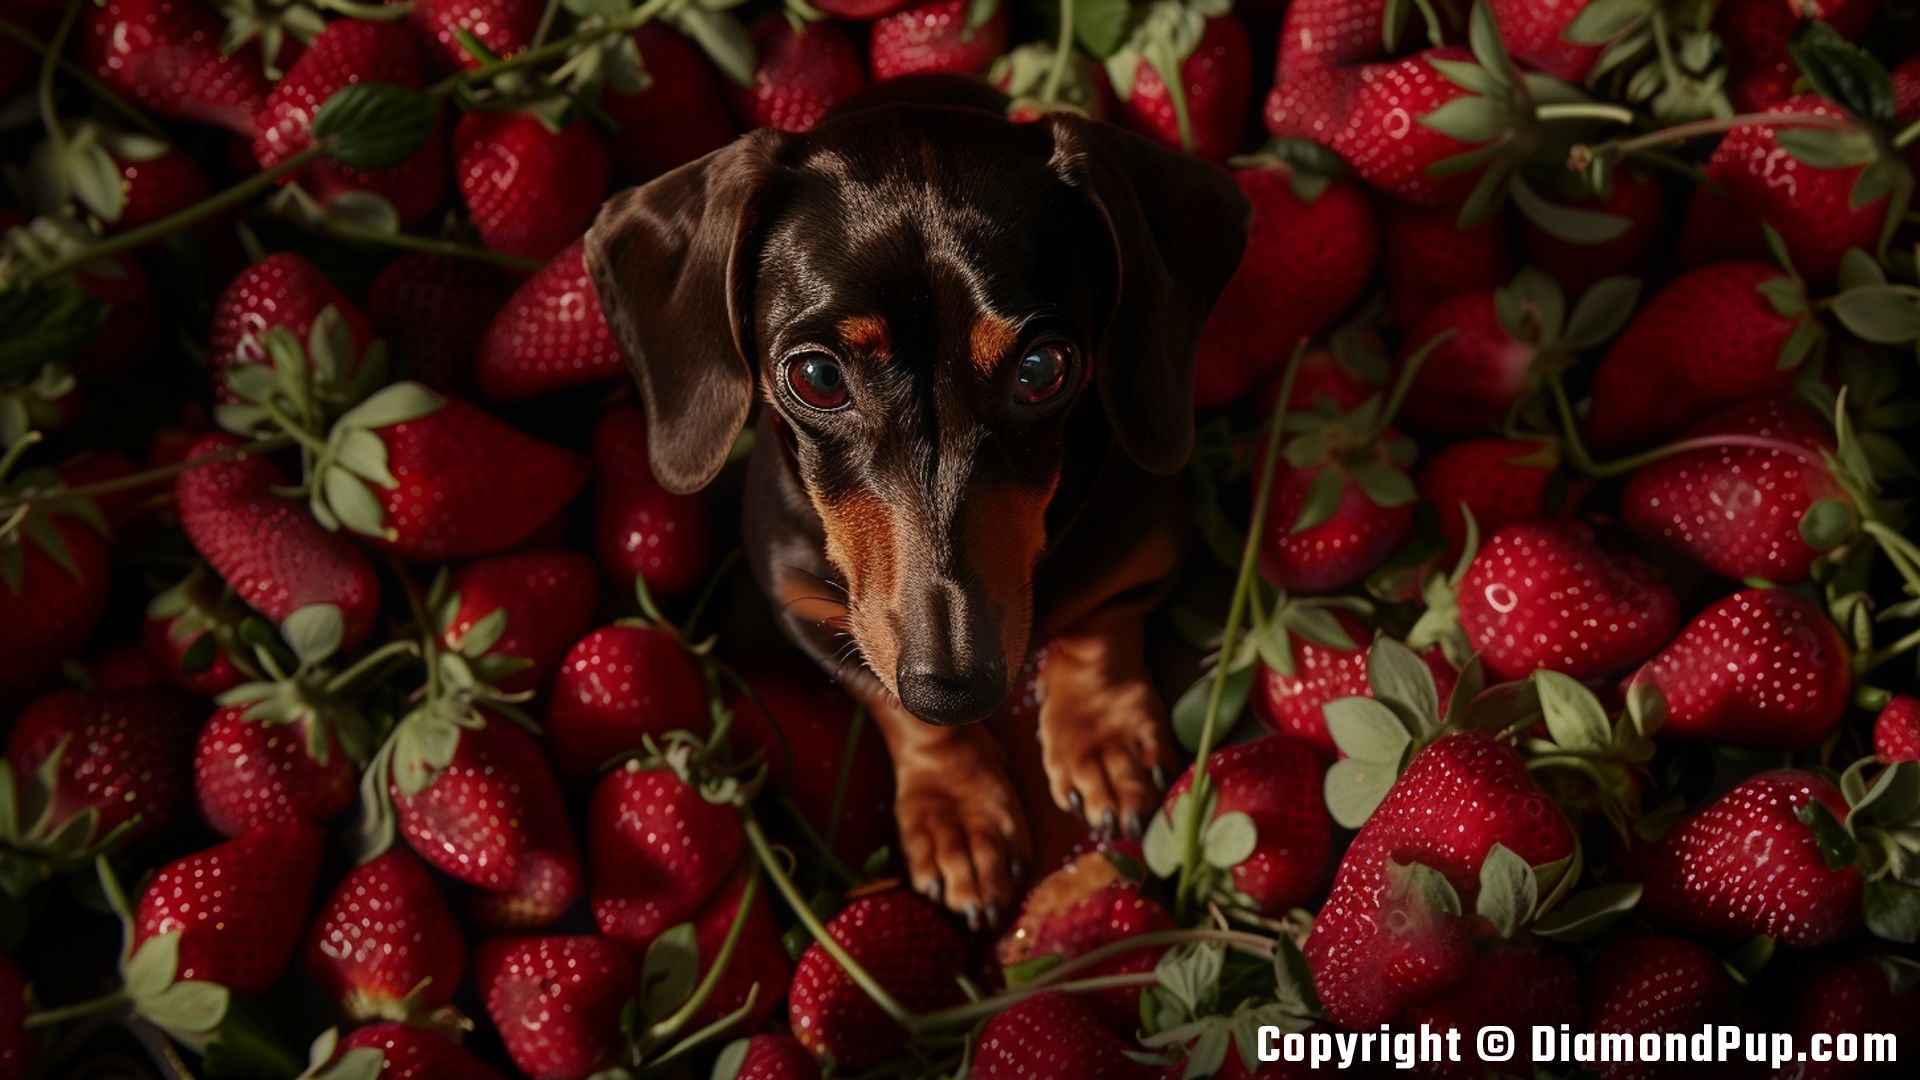 Photograph of a Cute Dachshund Snacking on Strawberries